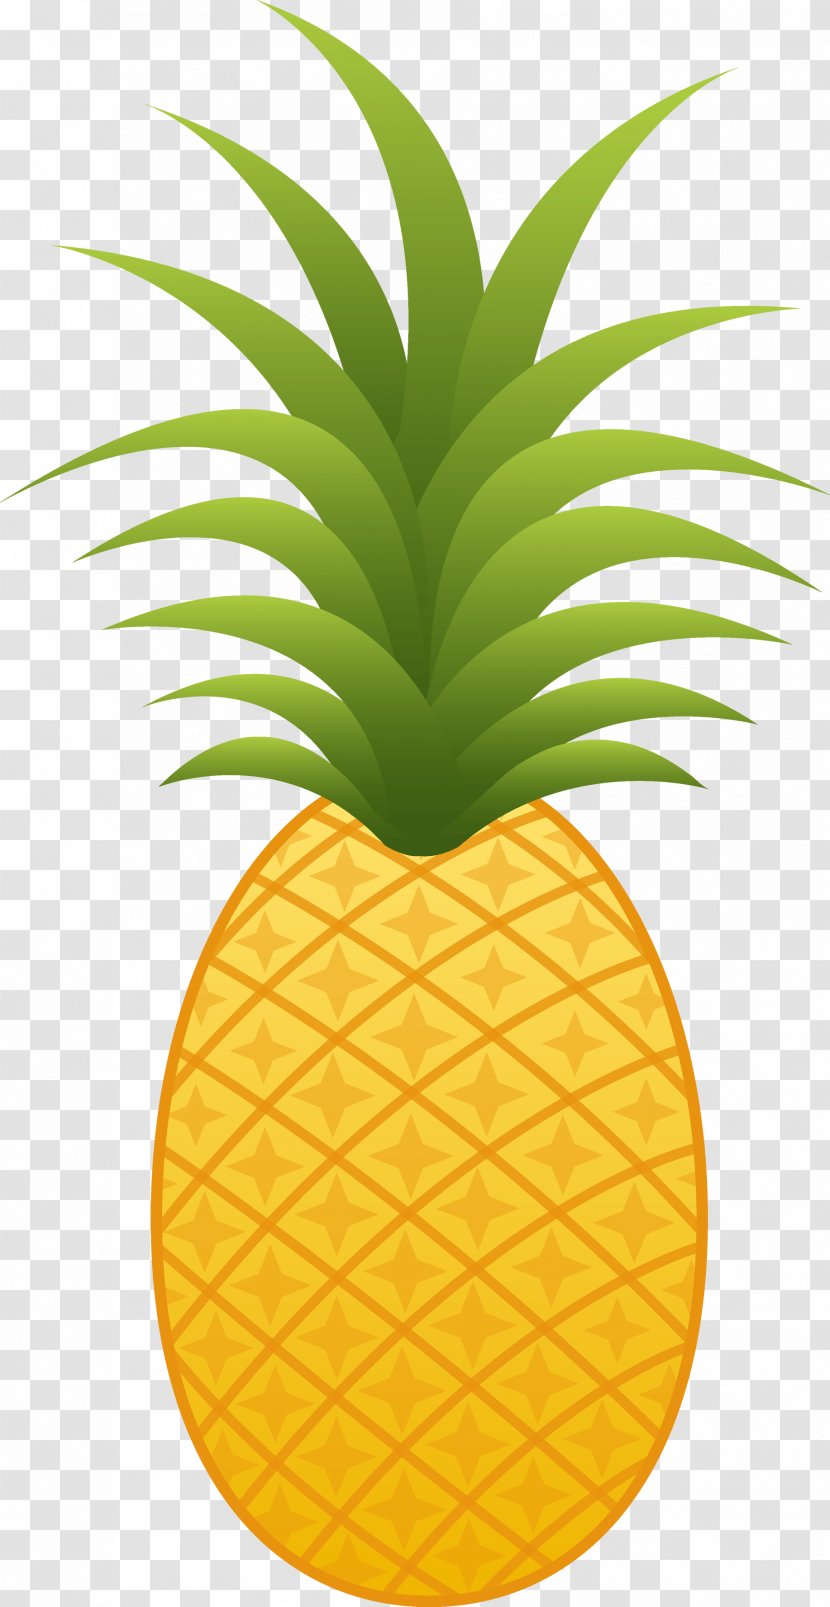 Pineapple Cuisine Of Hawaii Clip Art - Pattern - Image Download Transparent PNG